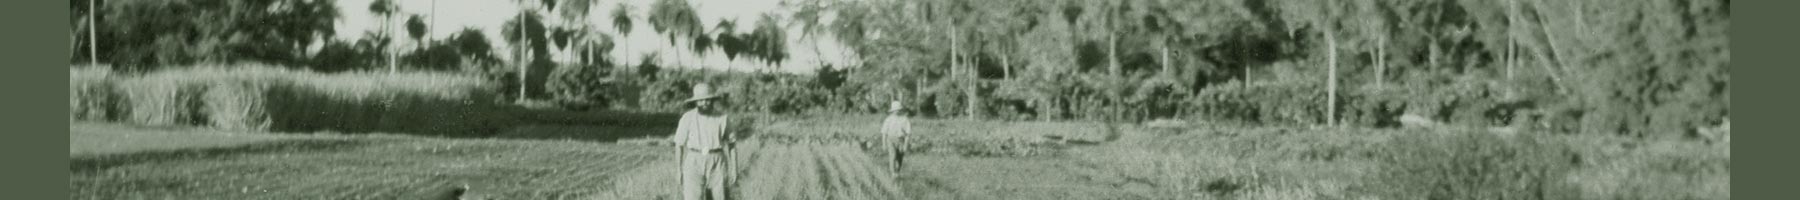 men working in a field with palm trees in the background